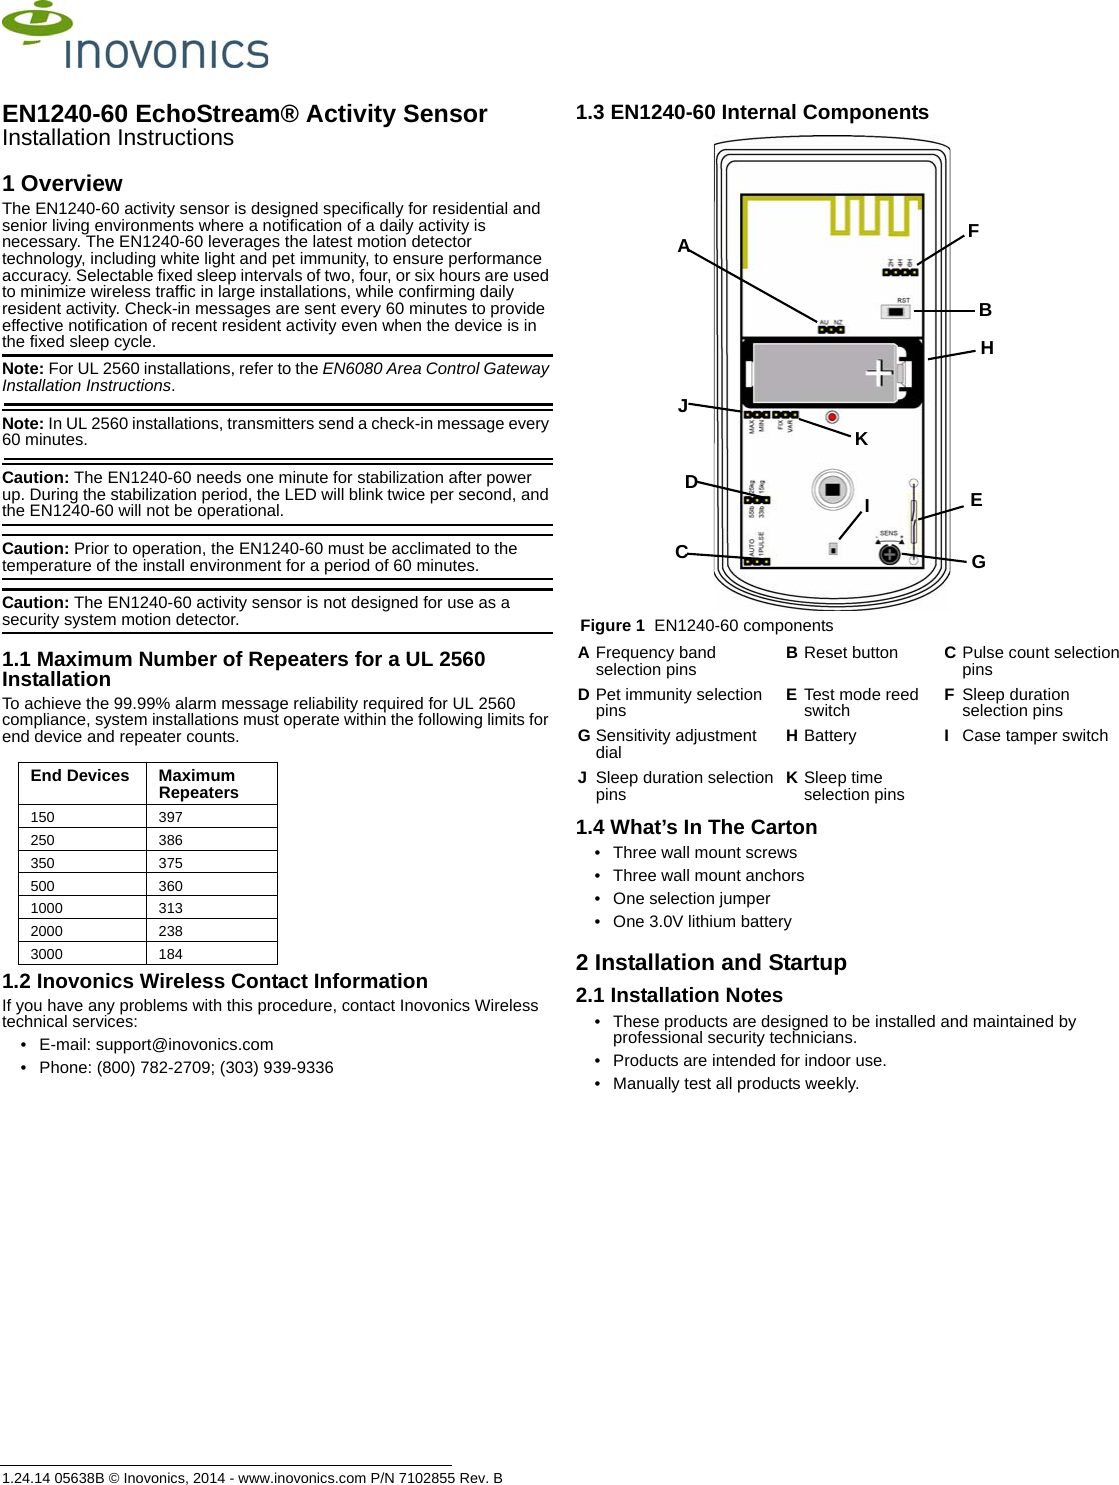 1.24.14 05638B © Inovonics, 2014 - www.inovonics.com P/N 7102855 Rev. BEN1240-60 EchoStream® Activity SensorInstallation Instructions1 OverviewThe EN1240-60 activity sensor is designed specifically for residential and senior living environments where a notification of a daily activity is necessary. The EN1240-60 leverages the latest motion detector technology, including white light and pet immunity, to ensure performance accuracy. Selectable fixed sleep intervals of two, four, or six hours are used to minimize wireless traffic in large installations, while confirming daily resident activity. Check-in messages are sent every 60 minutes to provide effective notification of recent resident activity even when the device is in the fixed sleep cycle.Note: For UL 2560 installations, refer to the EN6080 Area Control Gateway Installation Instructions.Note: In UL 2560 installations, transmitters send a check-in message every 60 minutes.Caution: The EN1240-60 needs one minute for stabilization after power up. During the stabilization period, the LED will blink twice per second, and the EN1240-60 will not be operational.Caution: Prior to operation, the EN1240-60 must be acclimated to the temperature of the install environment for a period of 60 minutes.Caution: The EN1240-60 activity sensor is not designed for use as a security system motion detector.1.1 Maximum Number of Repeaters for a UL 2560 InstallationTo achieve the 99.99% alarm message reliability required for UL 2560 compliance, system installations must operate within the following limits for end device and repeater counts.1.2 Inovonics Wireless Contact InformationIf you have any problems with this procedure, contact Inovonics Wireless technical services:• E-mail: support@inovonics.com• Phone: (800) 782-2709; (303) 939-93361.3 EN1240-60 Internal Components Figure 1  EN1240-60 components1.4 What’s In The Carton• Three wall mount screws• Three wall mount anchors• One selection jumper• One 3.0V lithium battery2 Installation and Startup2.1 Installation Notes• These products are designed to be installed and maintained by professional security technicians.• Products are intended for indoor use.• Manually test all products weekly.End Devices Maximum Repeaters150 397250 386350 375500 3601000 3132000 2383000 184AFrequency band selection pins BReset button CPulse count selection pinsDPet immunity selection pins ETest mode reed switch FSleep duration selection pinsGSensitivity adjustment dial HBattery ICase tamper switchJSleep duration selection pins KSleep time selection pinsCADBEGFHIKJ